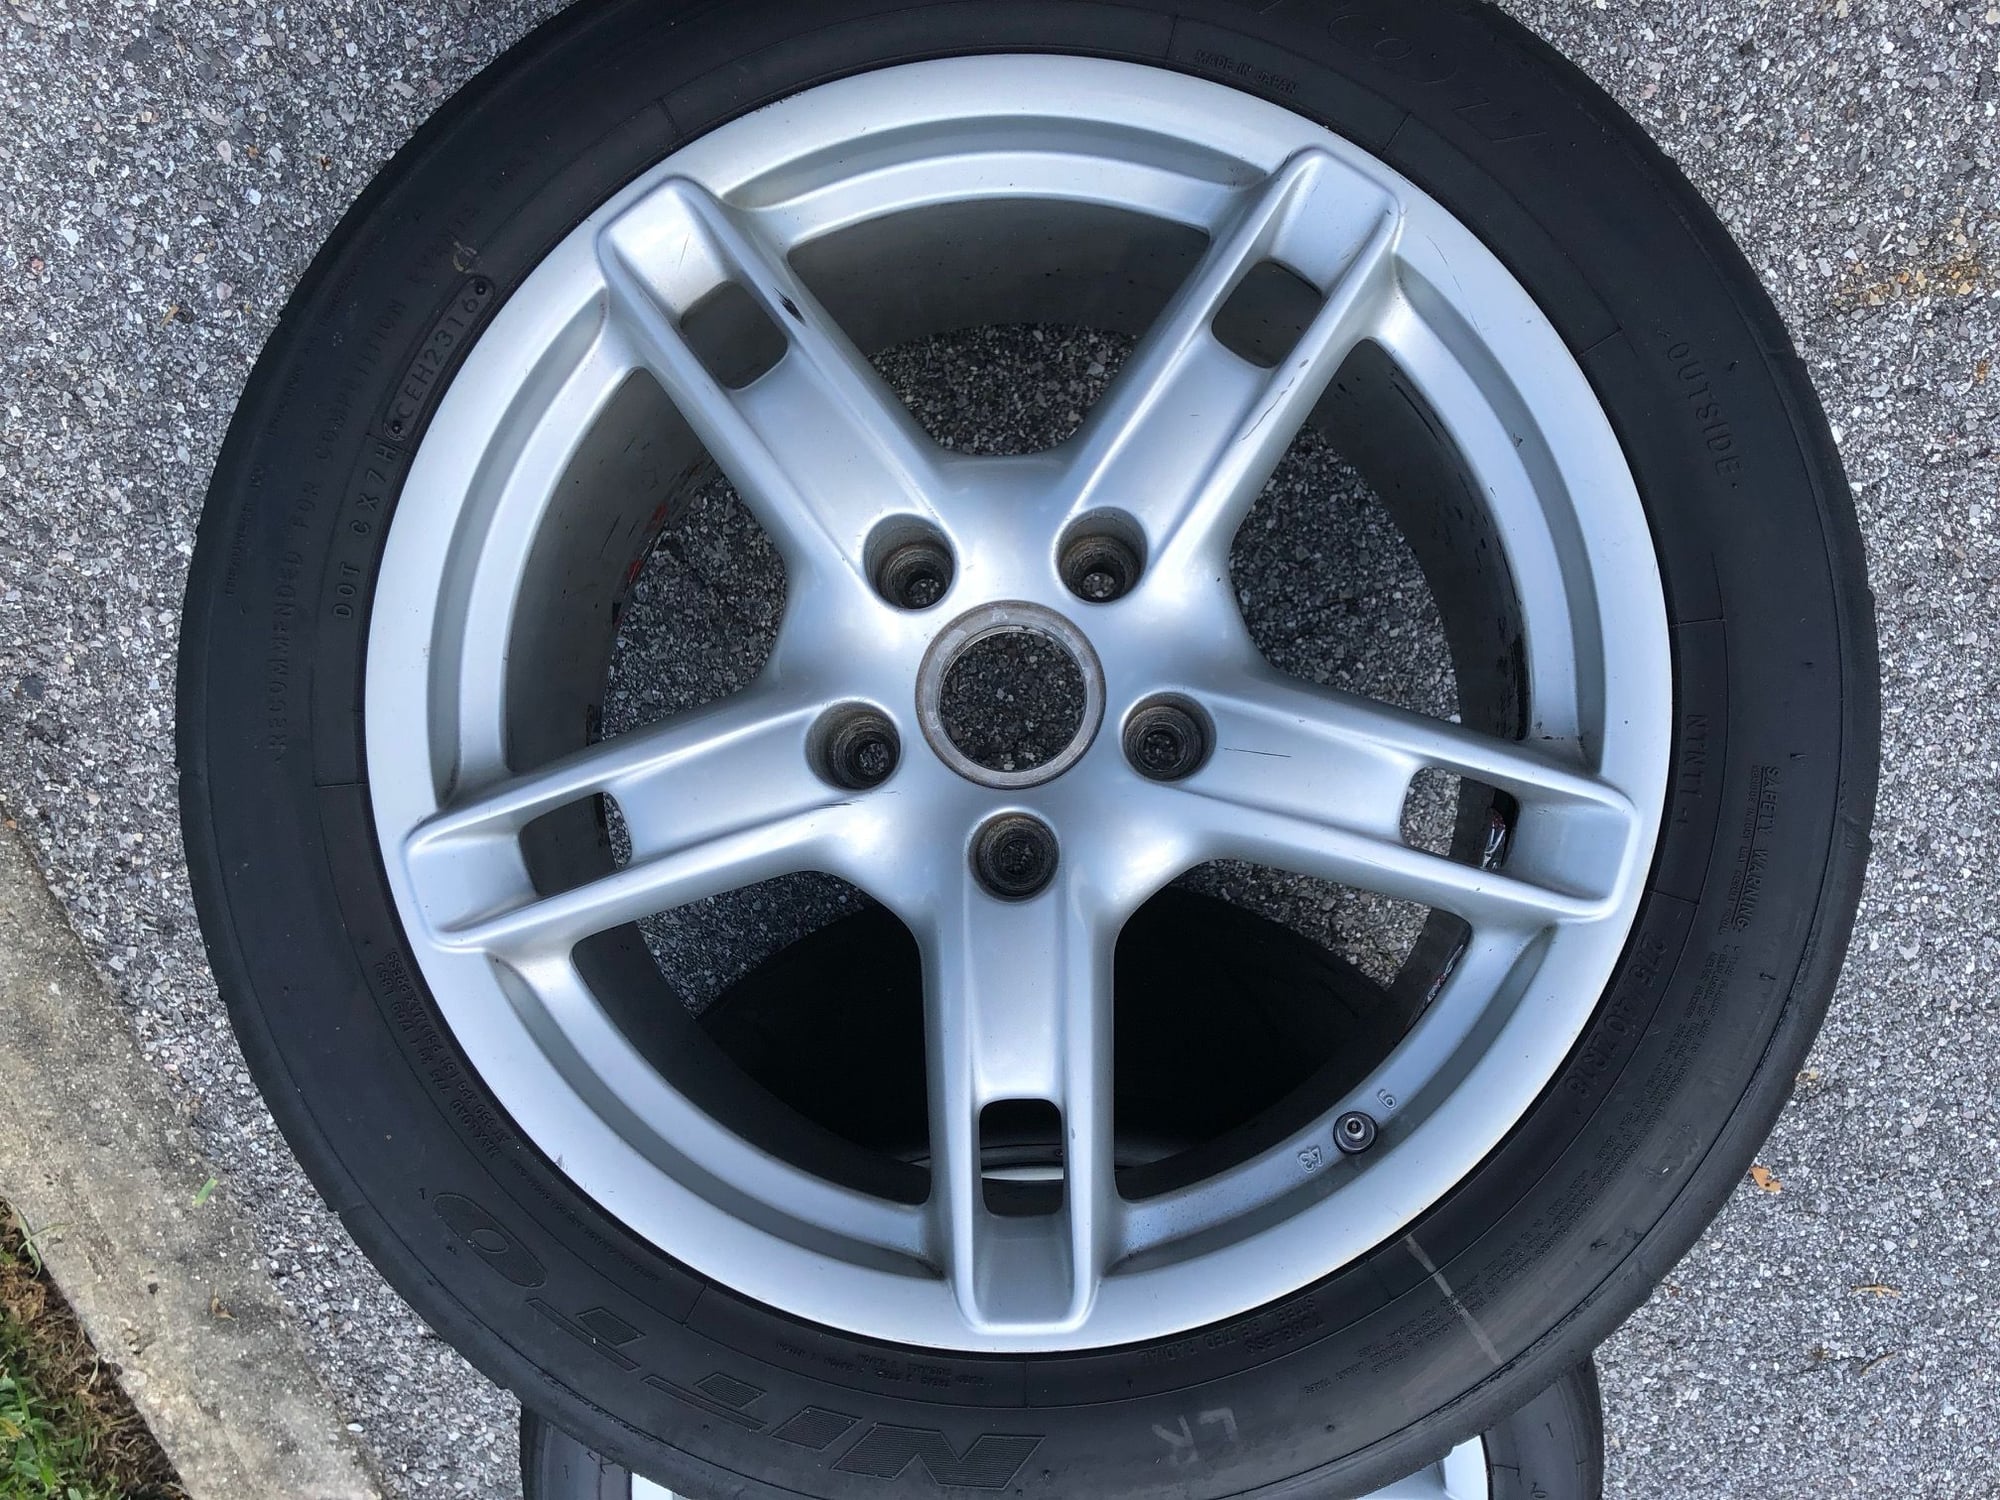 Wheels and Tires/Axles - FS: OEM Cayman S Wheels w/ Nitto NT01 Tires - Used - 2006 to 2008 Porsche Cayman - Venice, FL 34285, United States